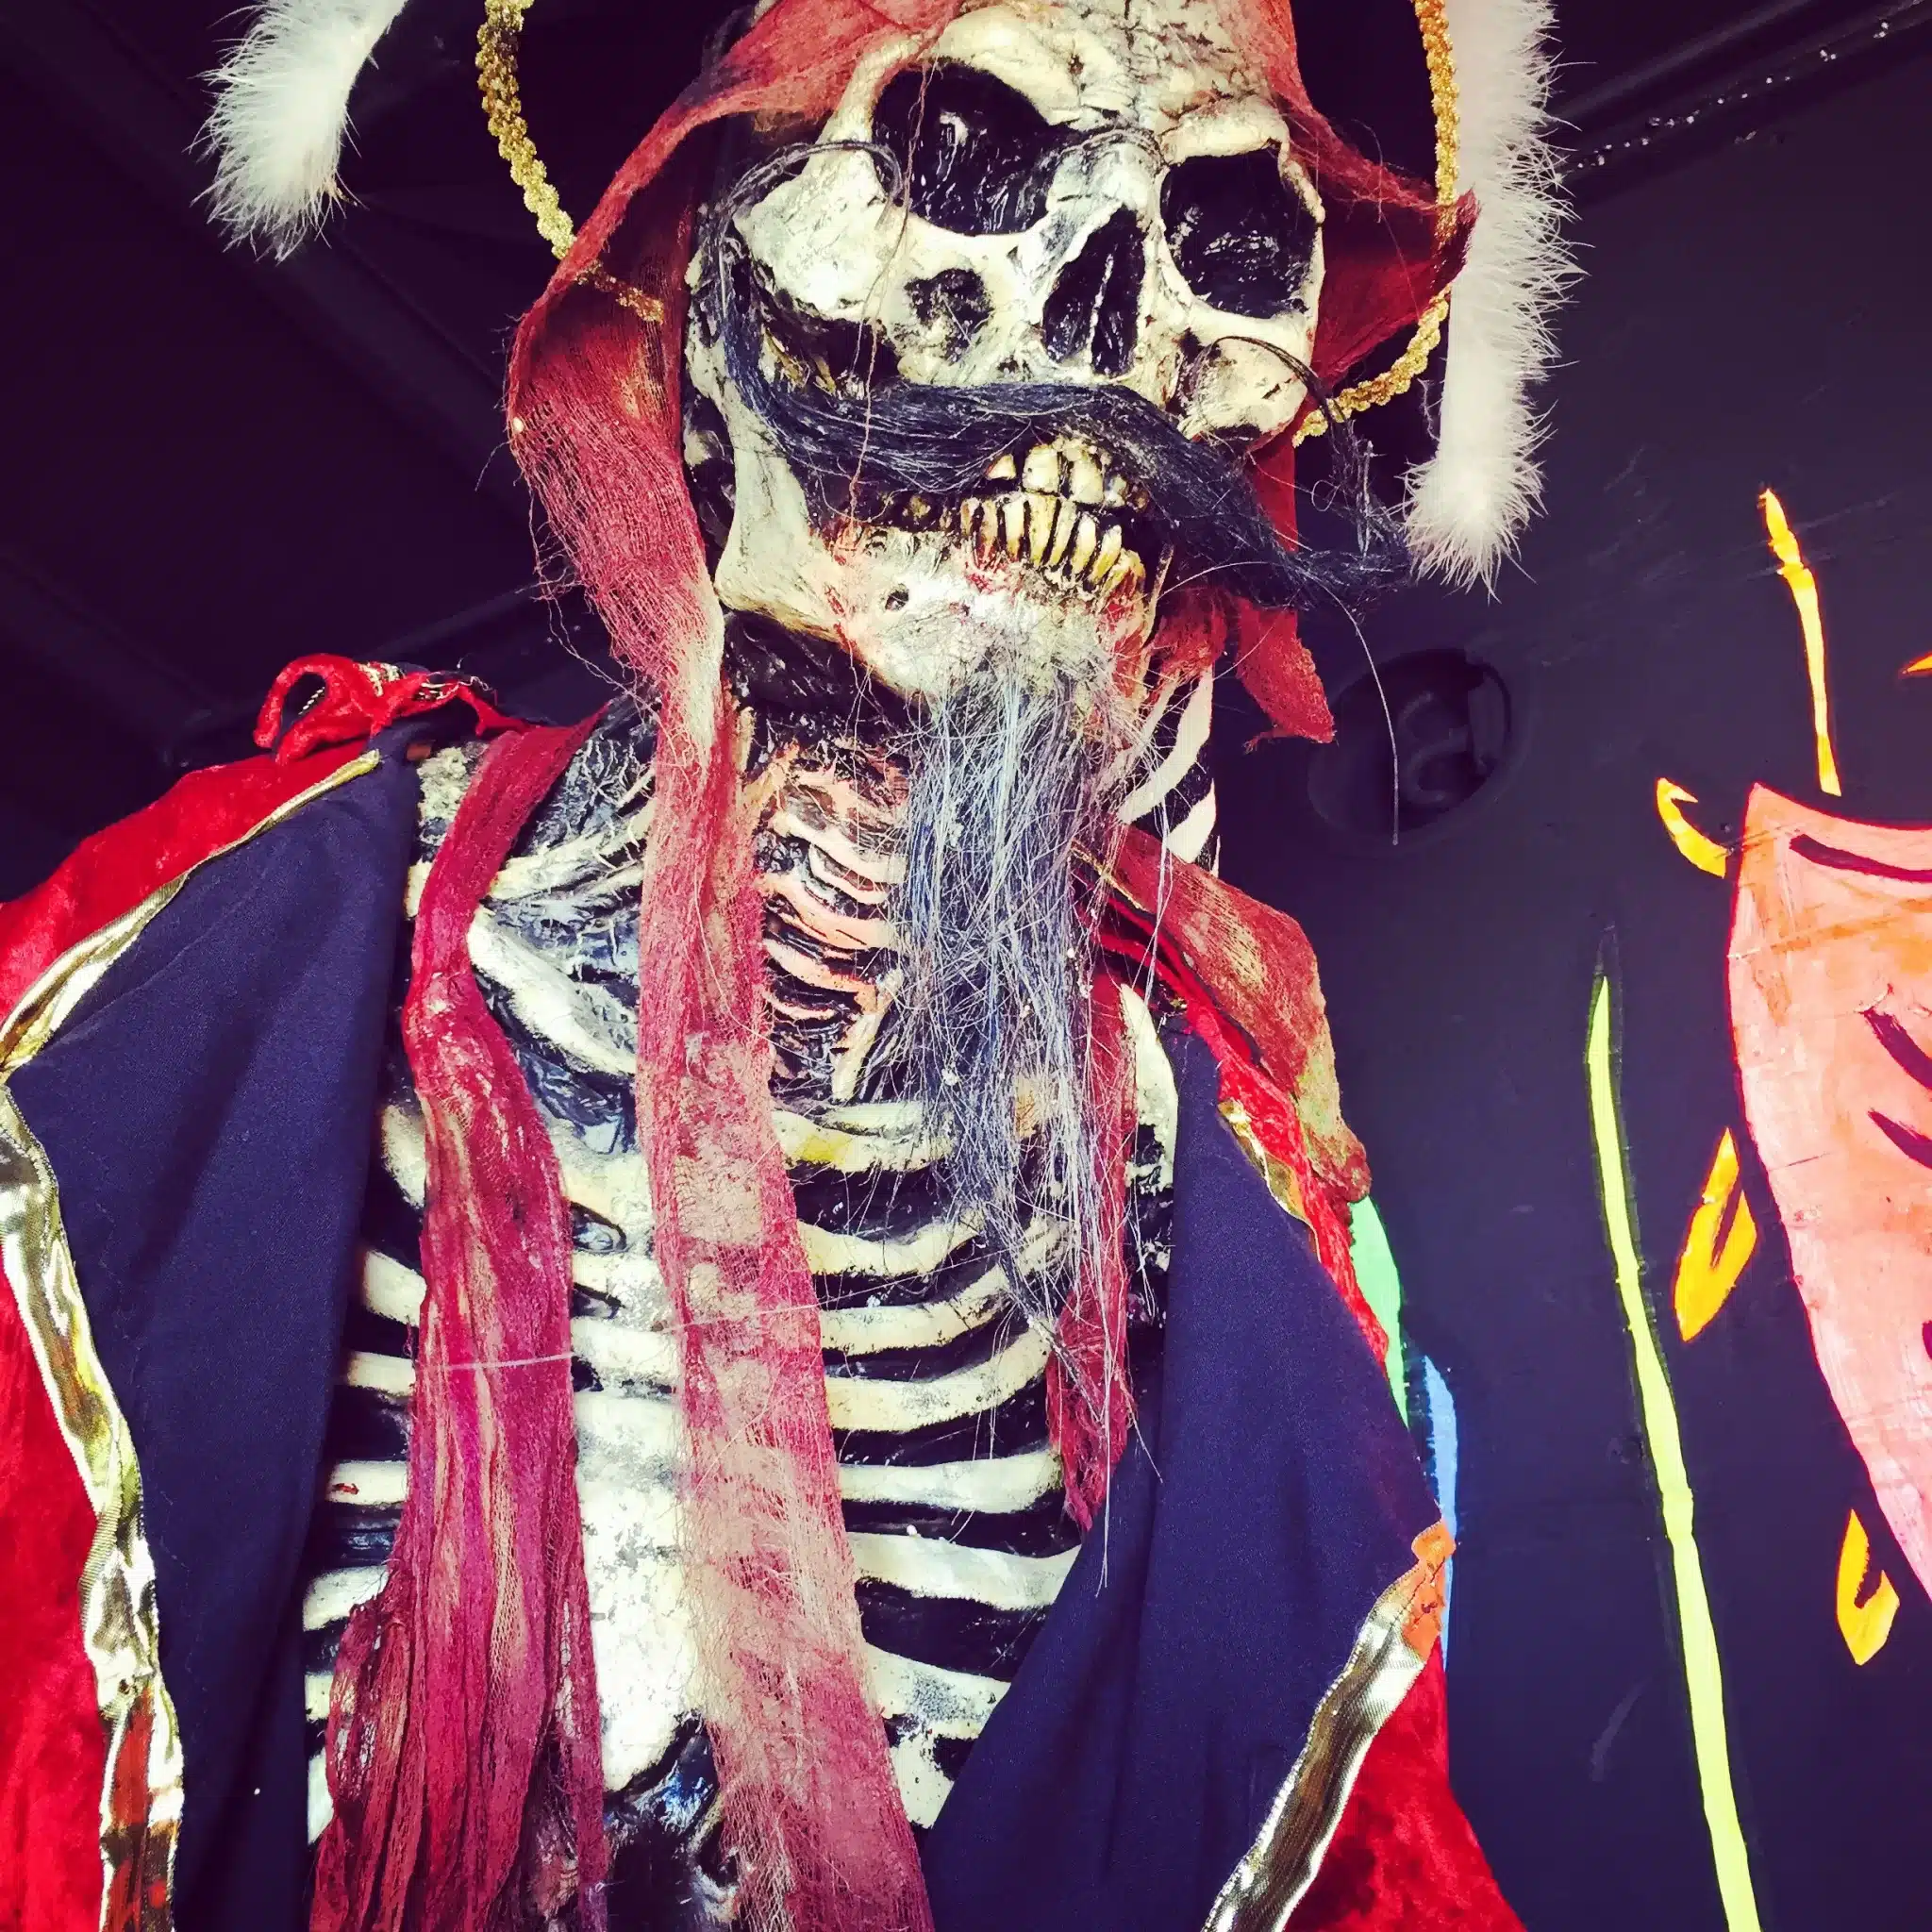 Creepy Skull Pirate Statue with Beard and Mustache at Terror in the Corn